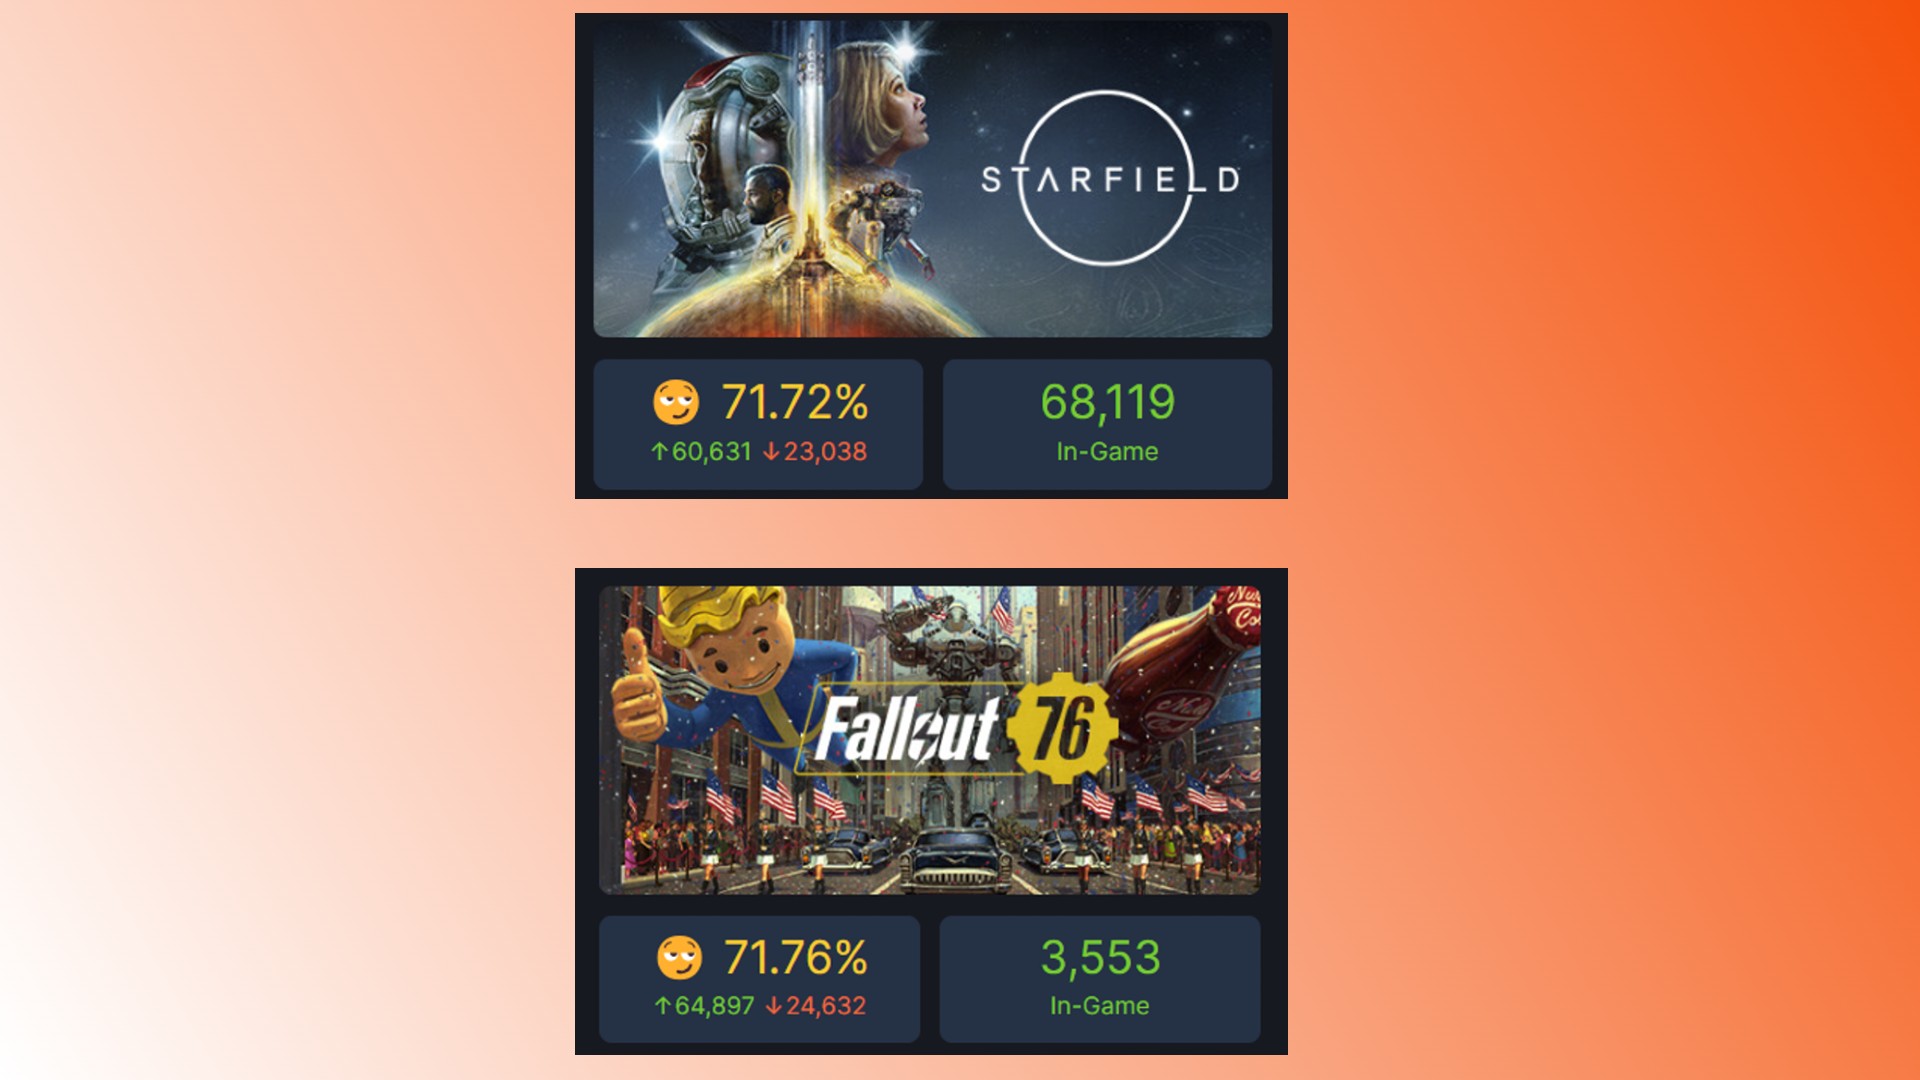 Starfield Steam reviews: An image comparing Starfield Steam review scores to those of Bethesda RPG game Fallout 76